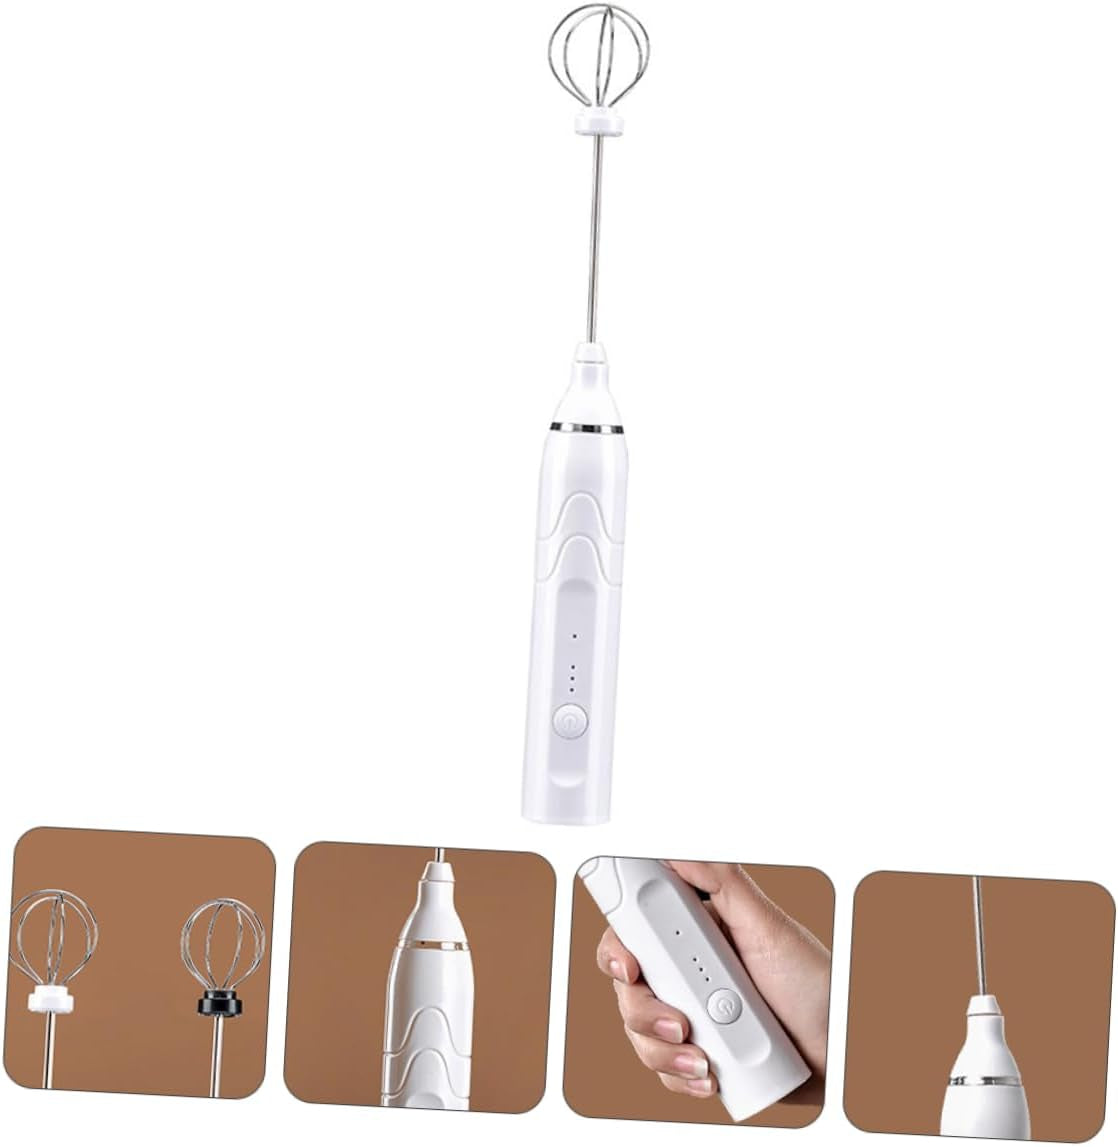 Cabilock Electric Egg Beater Electric Milk Frother Blenders Milk Foam Mixer Cake Mini Mixer Blender Coffee Stirrer Food Stand Mixer Hand Mixer Stainless Steel Household Baking Tools White  Cabilock   